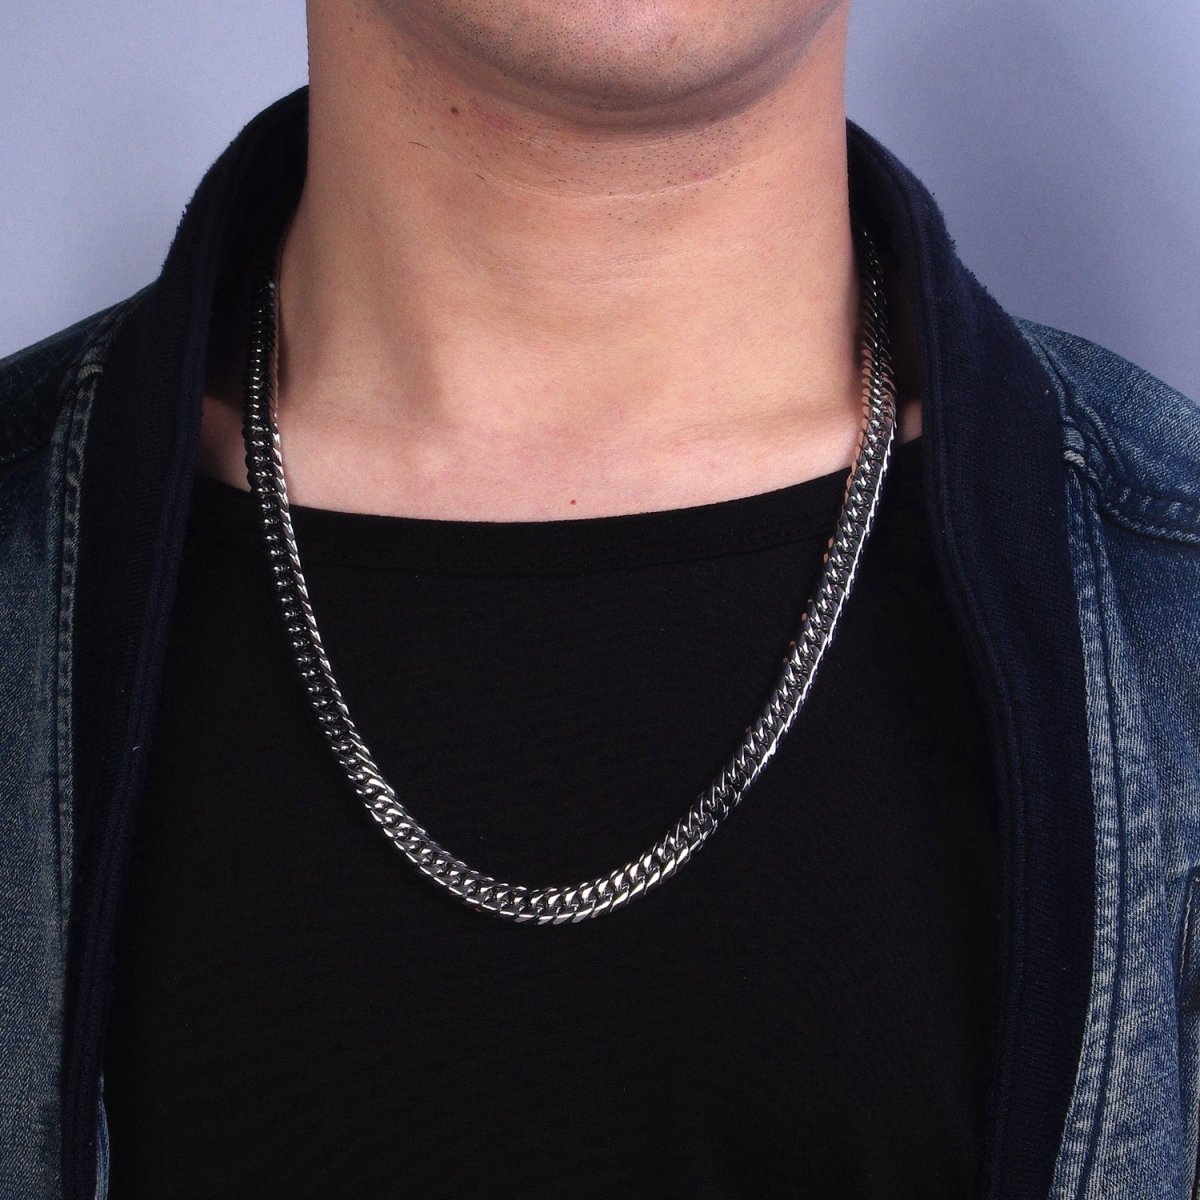 24.5 Inch Silver Cuban Curb Chain, Stainless Steel Heavy Flat Miami Cuban Curb for Men Necklace 8mm, 10mm, 12mm | WA-1723 WA-1724 WA-1725 Clearance Pricing - DLUXCA